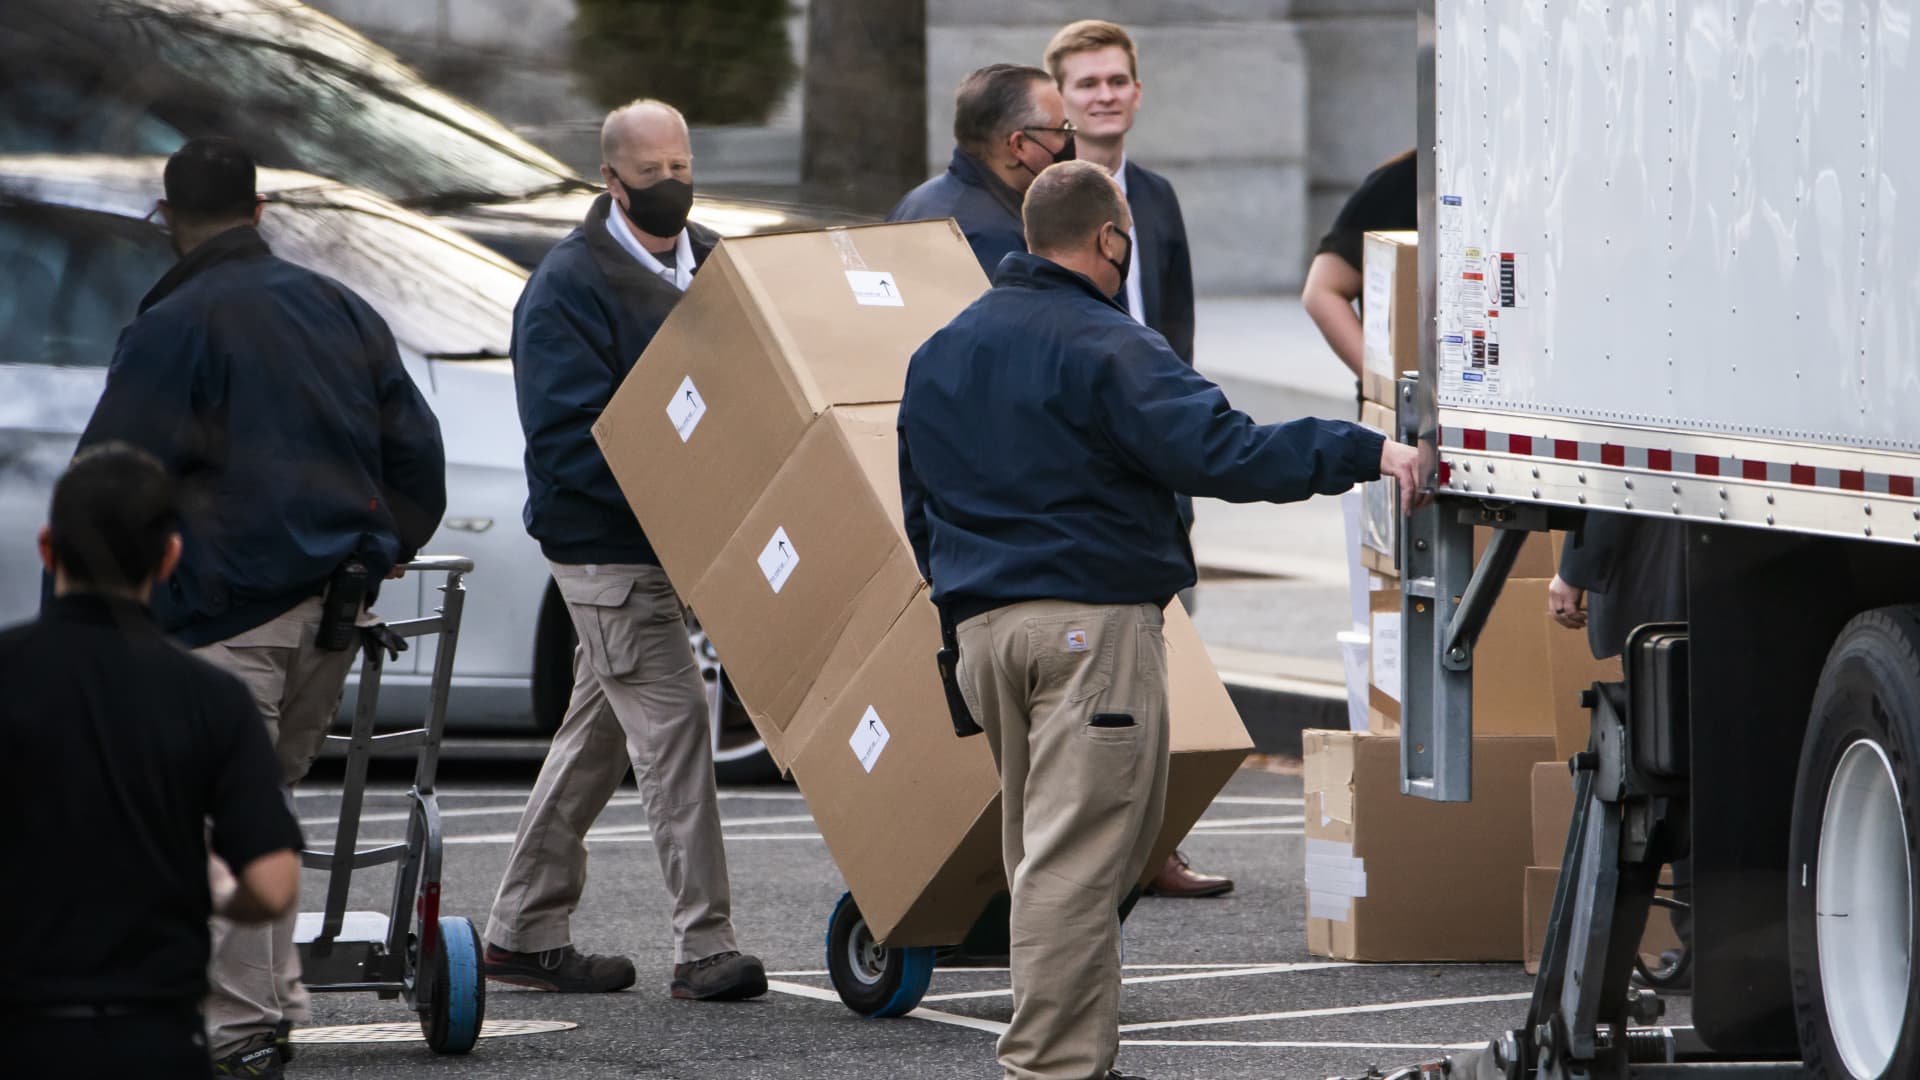 Workers move boxes onto a truck on West Executive Avenue between the White House and the Eisenhower Executive Office Building in Washington, D.C., on Thursday, Jan. 14, 2021.